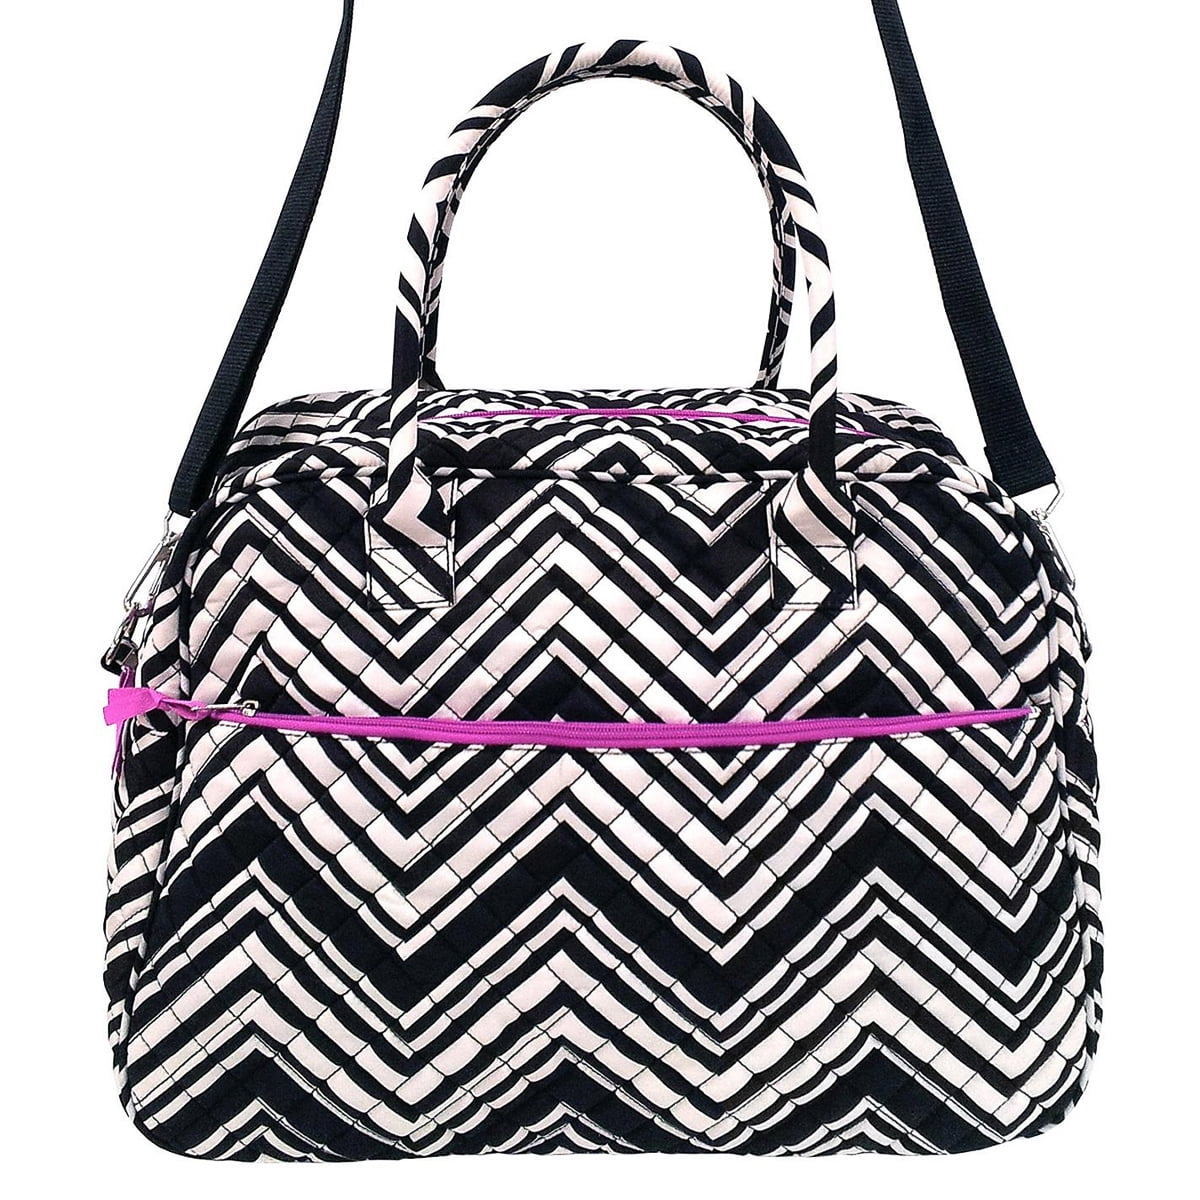 Generic Quilted Duffel Bag, Black and White Chevron - Walmart.com